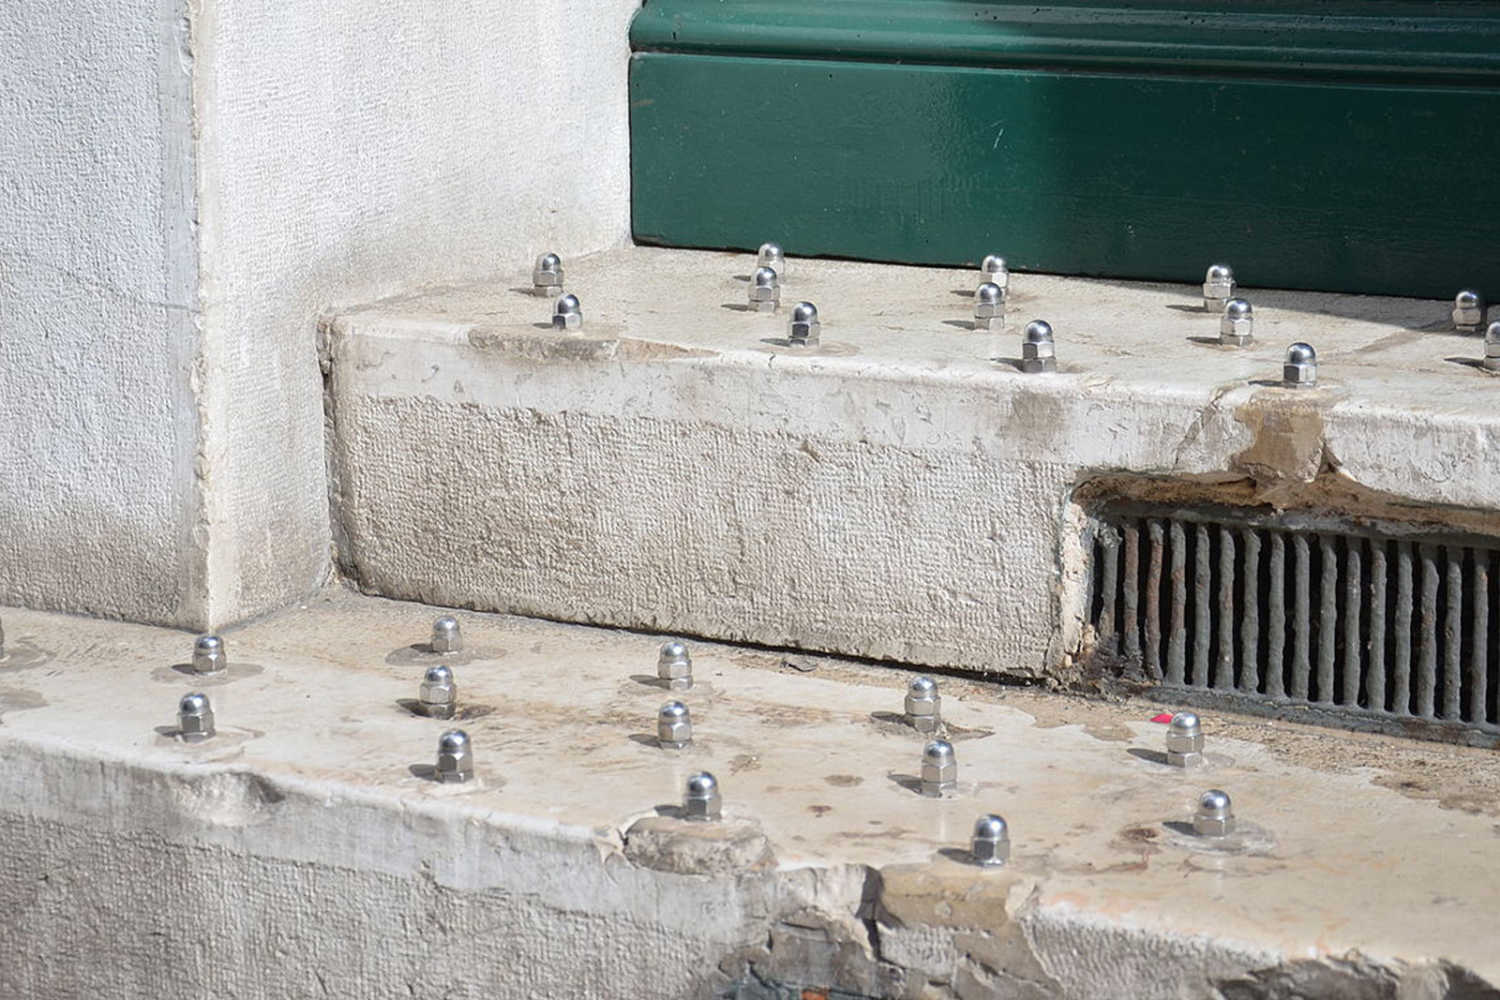 Spikes on a step to stop people from sitting. Credit: DocteurCosmos on Wikimedia Commons